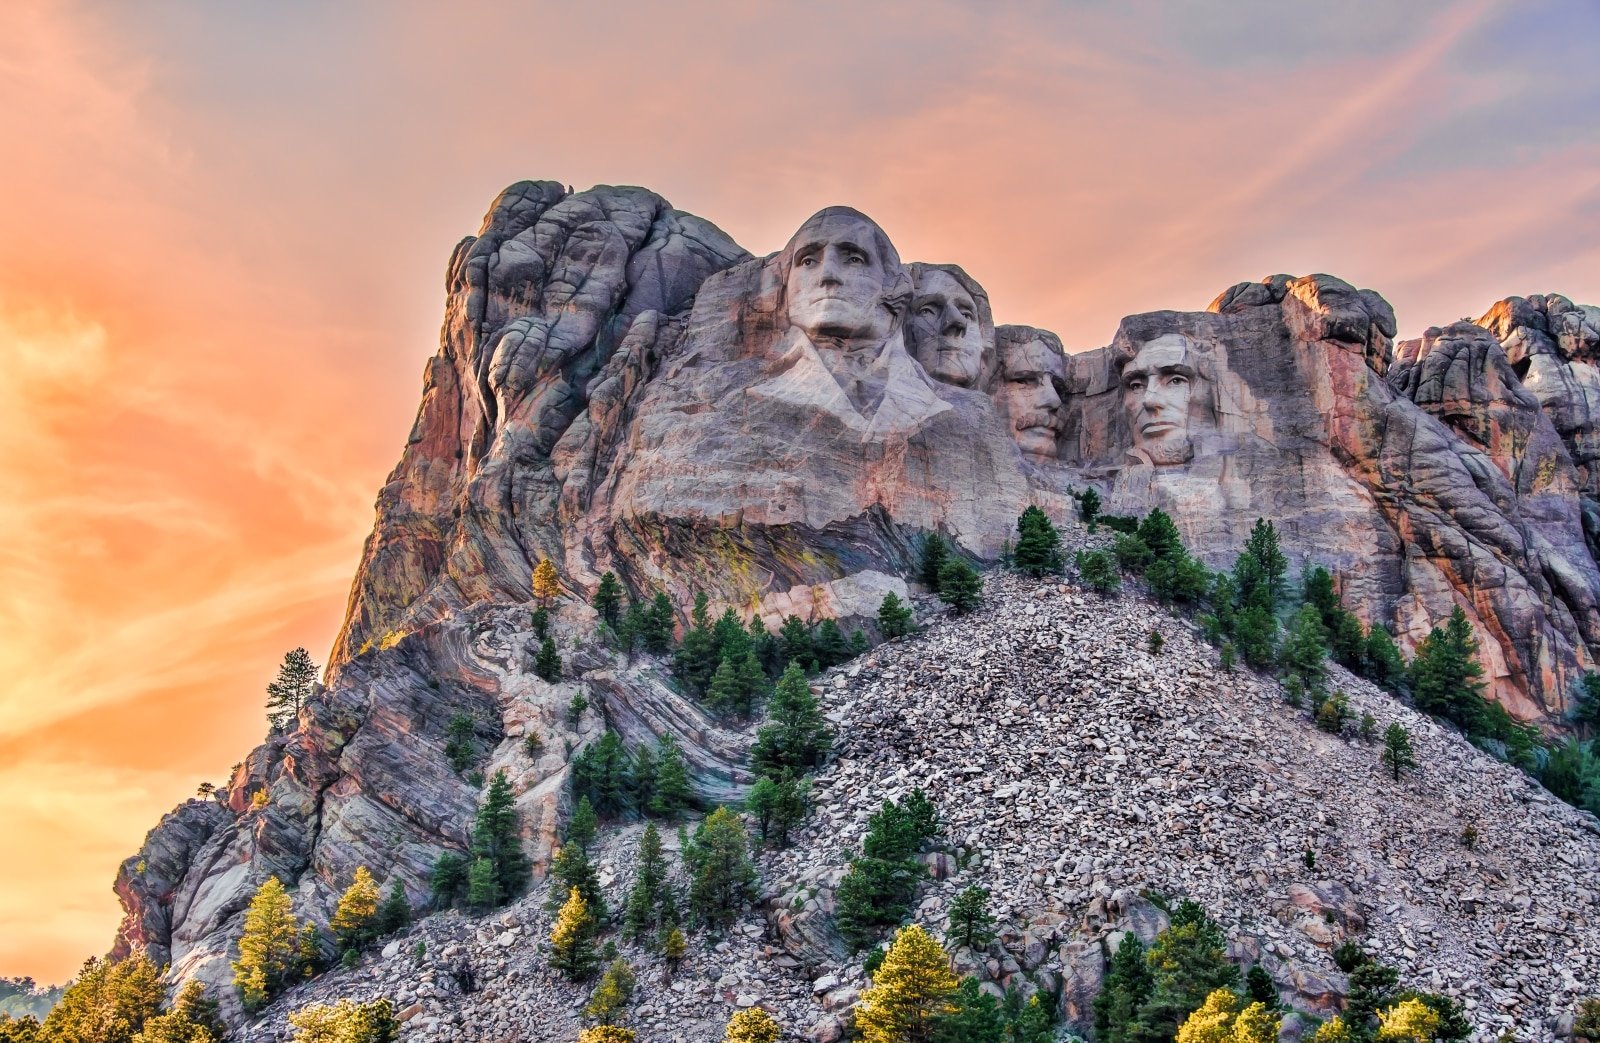 <p class="wp-caption-text">Image Credit: Shutterstock / JohnDSmith</p>  <p>Beyond Mount Rushmore, this region offers winding roads through forests and past stunning rock formations. A serene escape with a touch of history.</p>